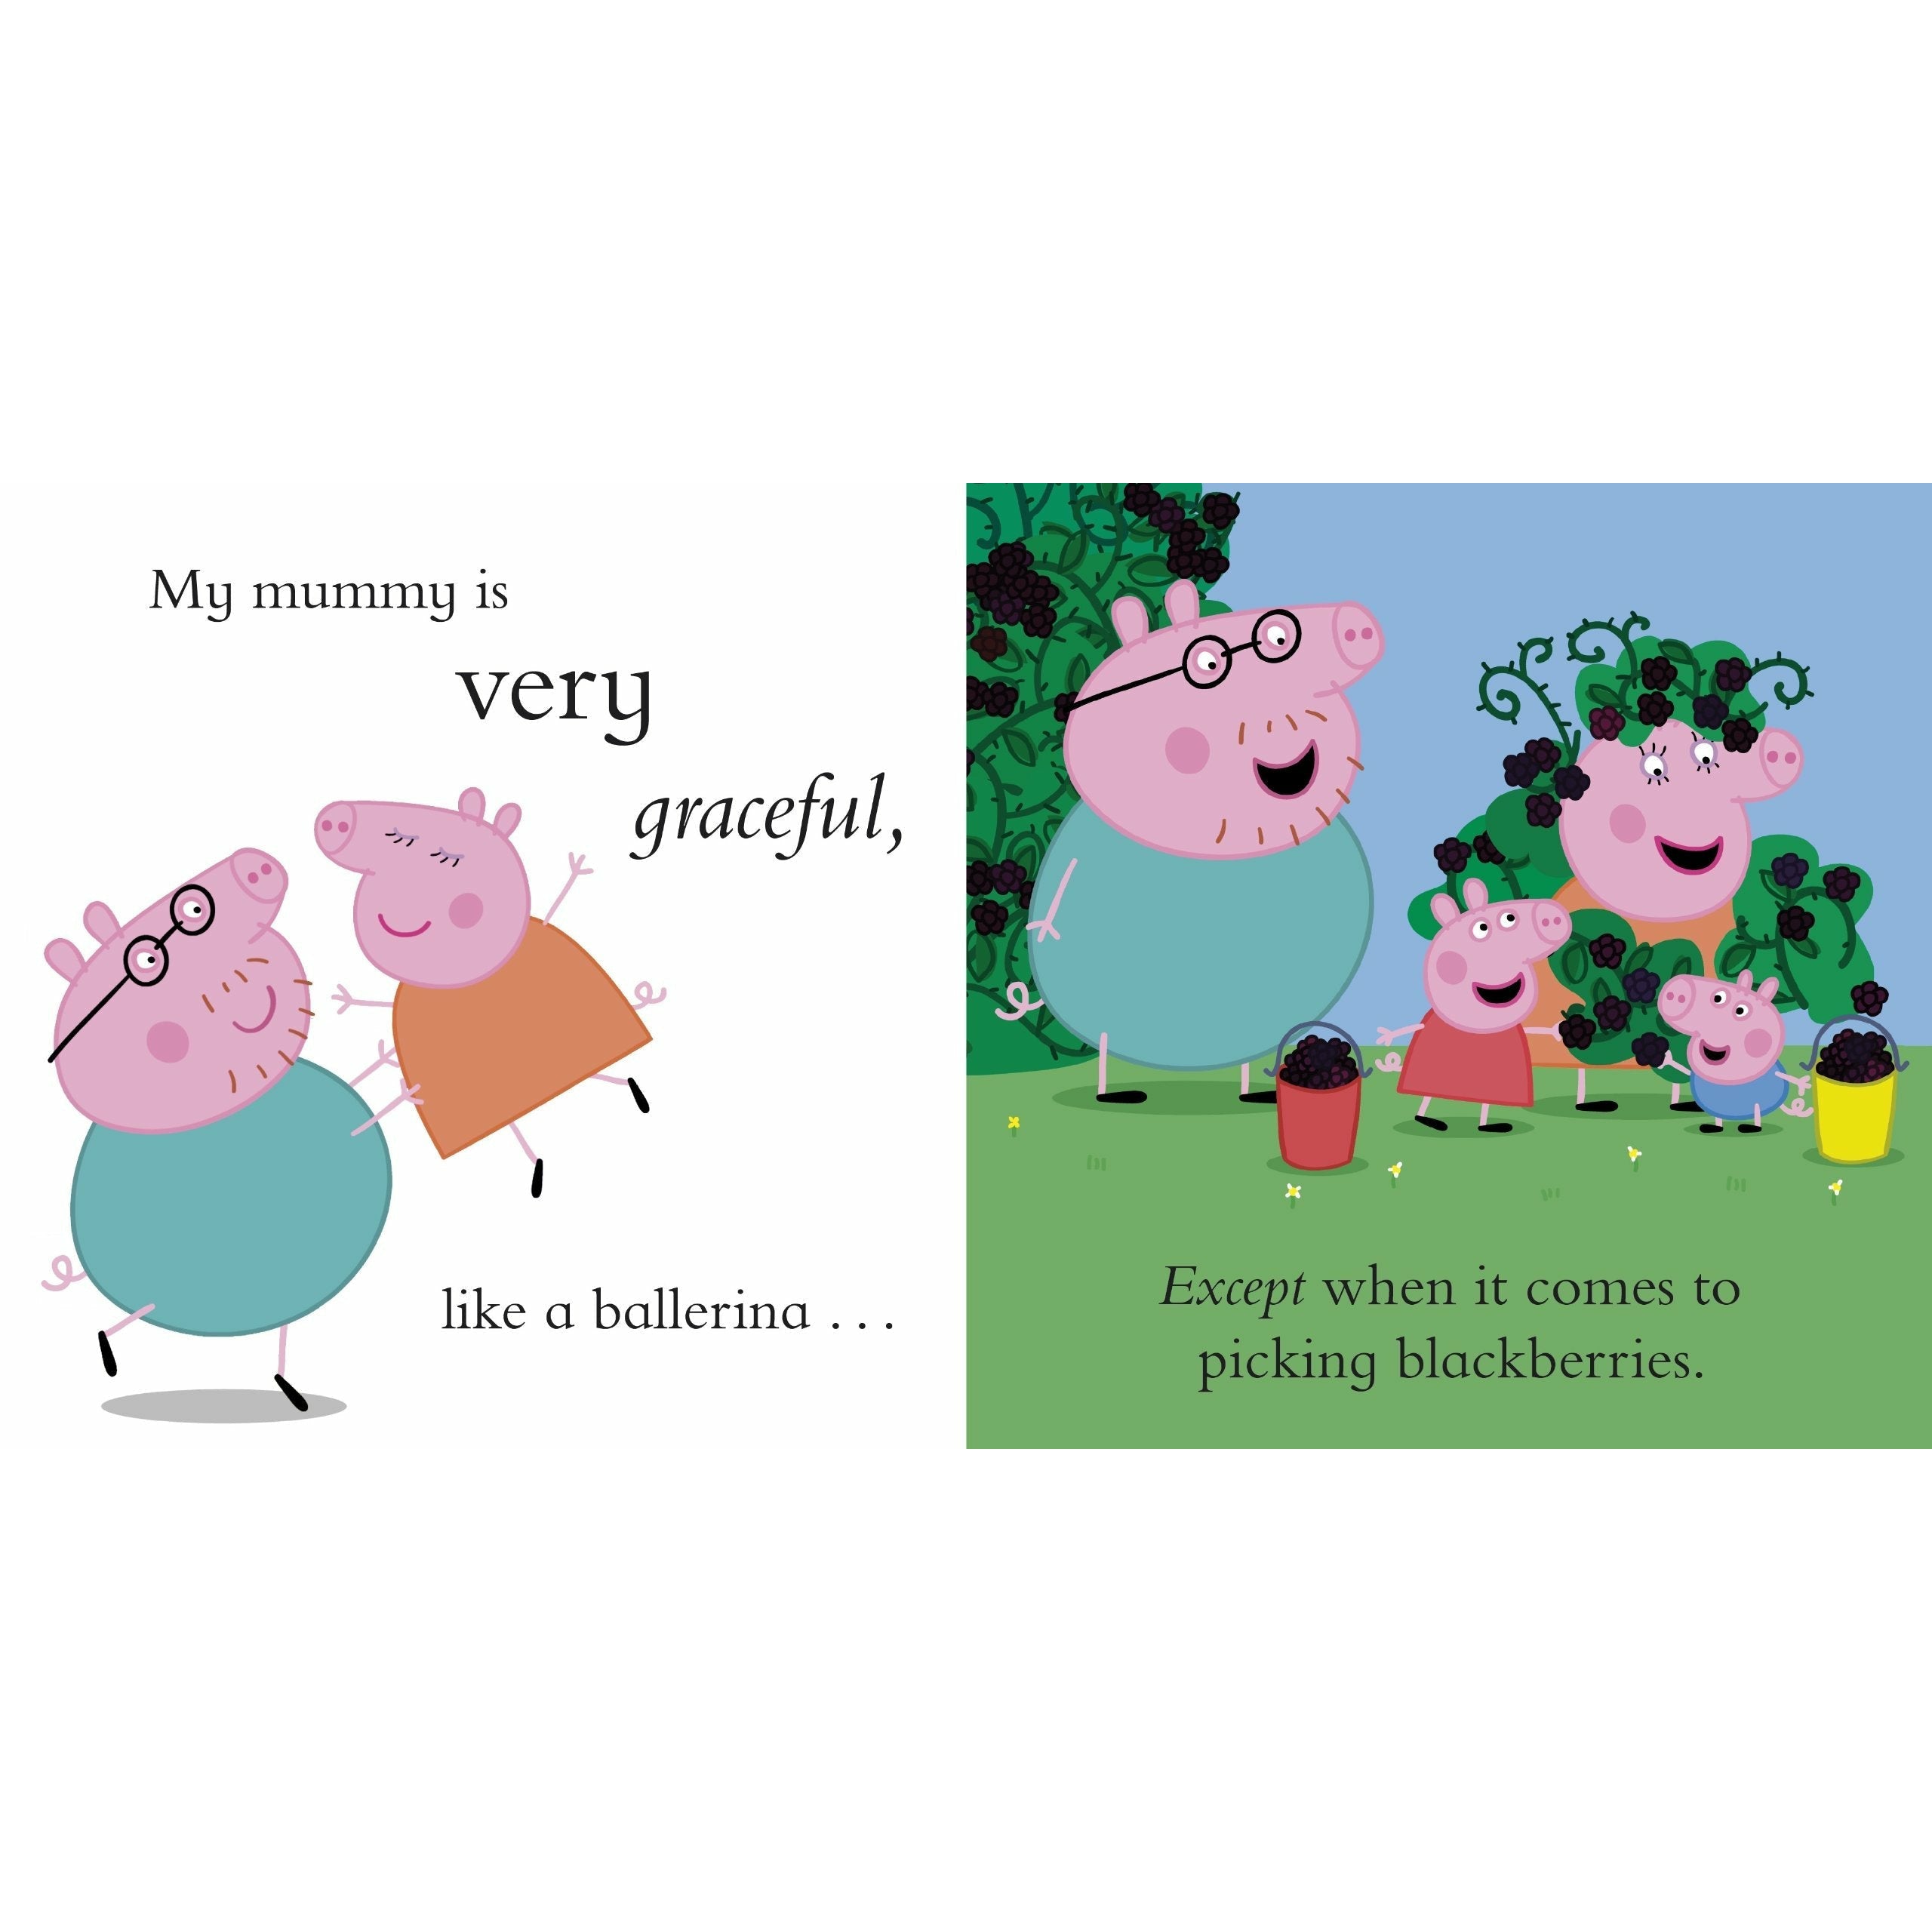 Oh Goody! Pampers Release New Peppa Pig Prints on Limited Edition